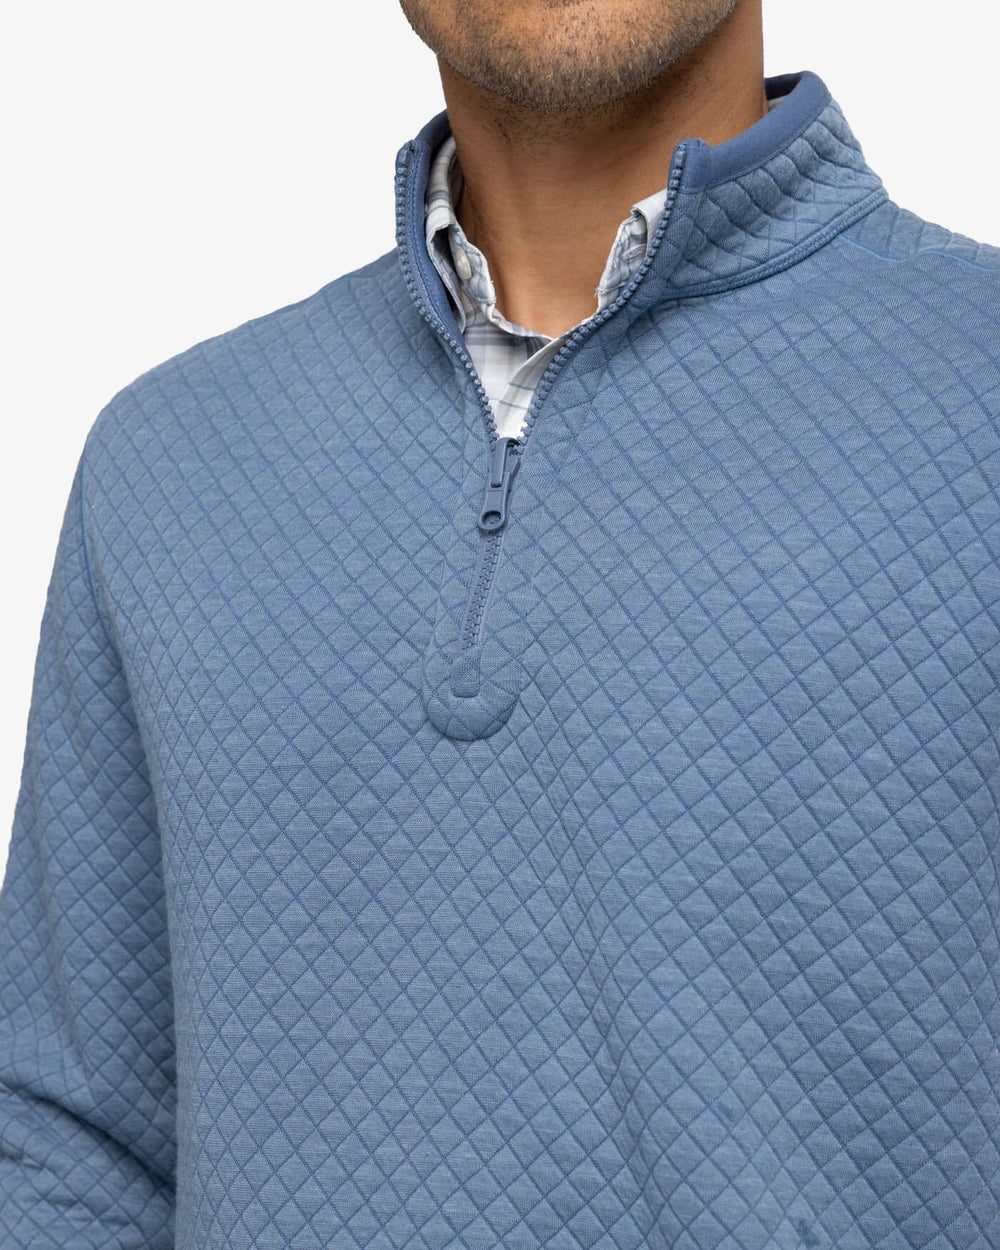 The detail view of the Southern Tide Arden Reversible Quarter Zip by Southern Tide - Blue Haze